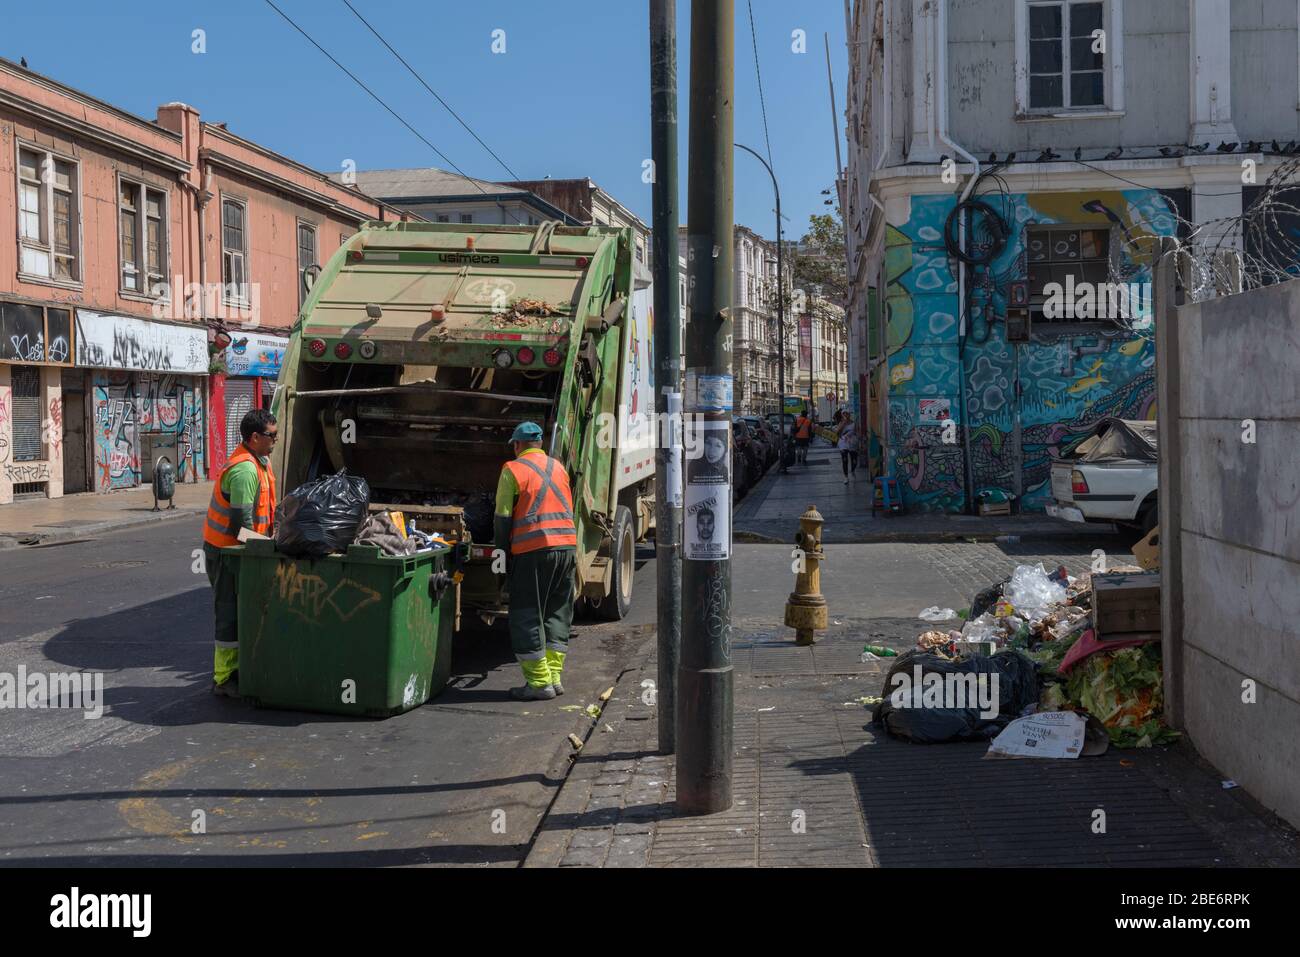 Garbage workers collect houses while collecting garbage containers on the streets of the old town of Valparaiso, Chile Stock Photo